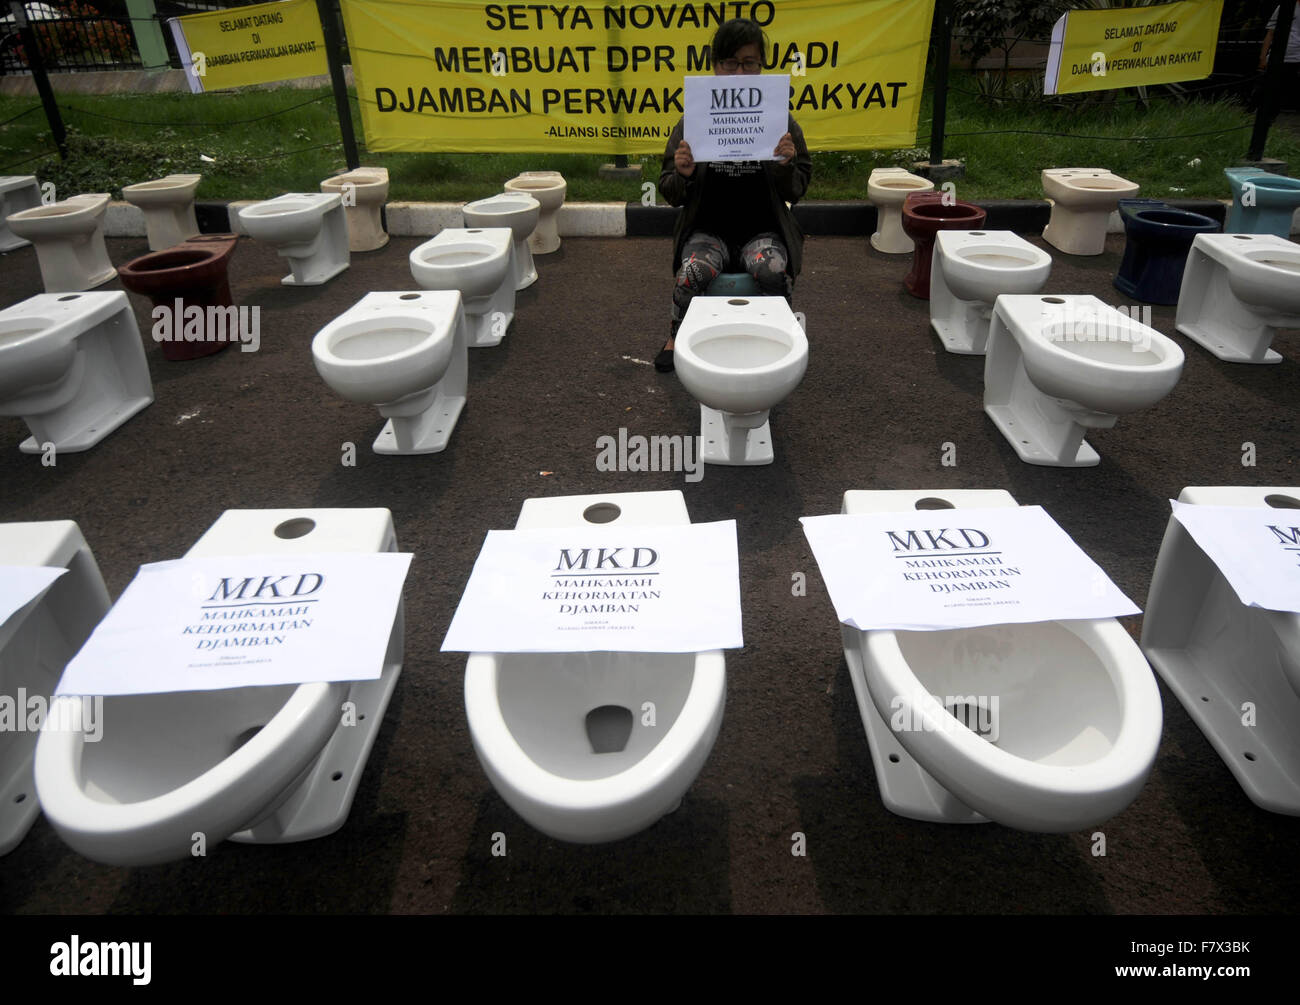 Jakarta. 3rd Dec, 2015. A woman sits on a water closet displayed during a protest in front of the House of Representative building in Jakarta, Indonesia. Dec. 3, 2015. An Indonesian minister testified against the House of Representative's speaker Wednesday, accusing him of trying to convince the regional director of a mining giant that its license could be extended in exchange for shares. © Agung Kuncahya B./Xinhua/Alamy Live News Stock Photo